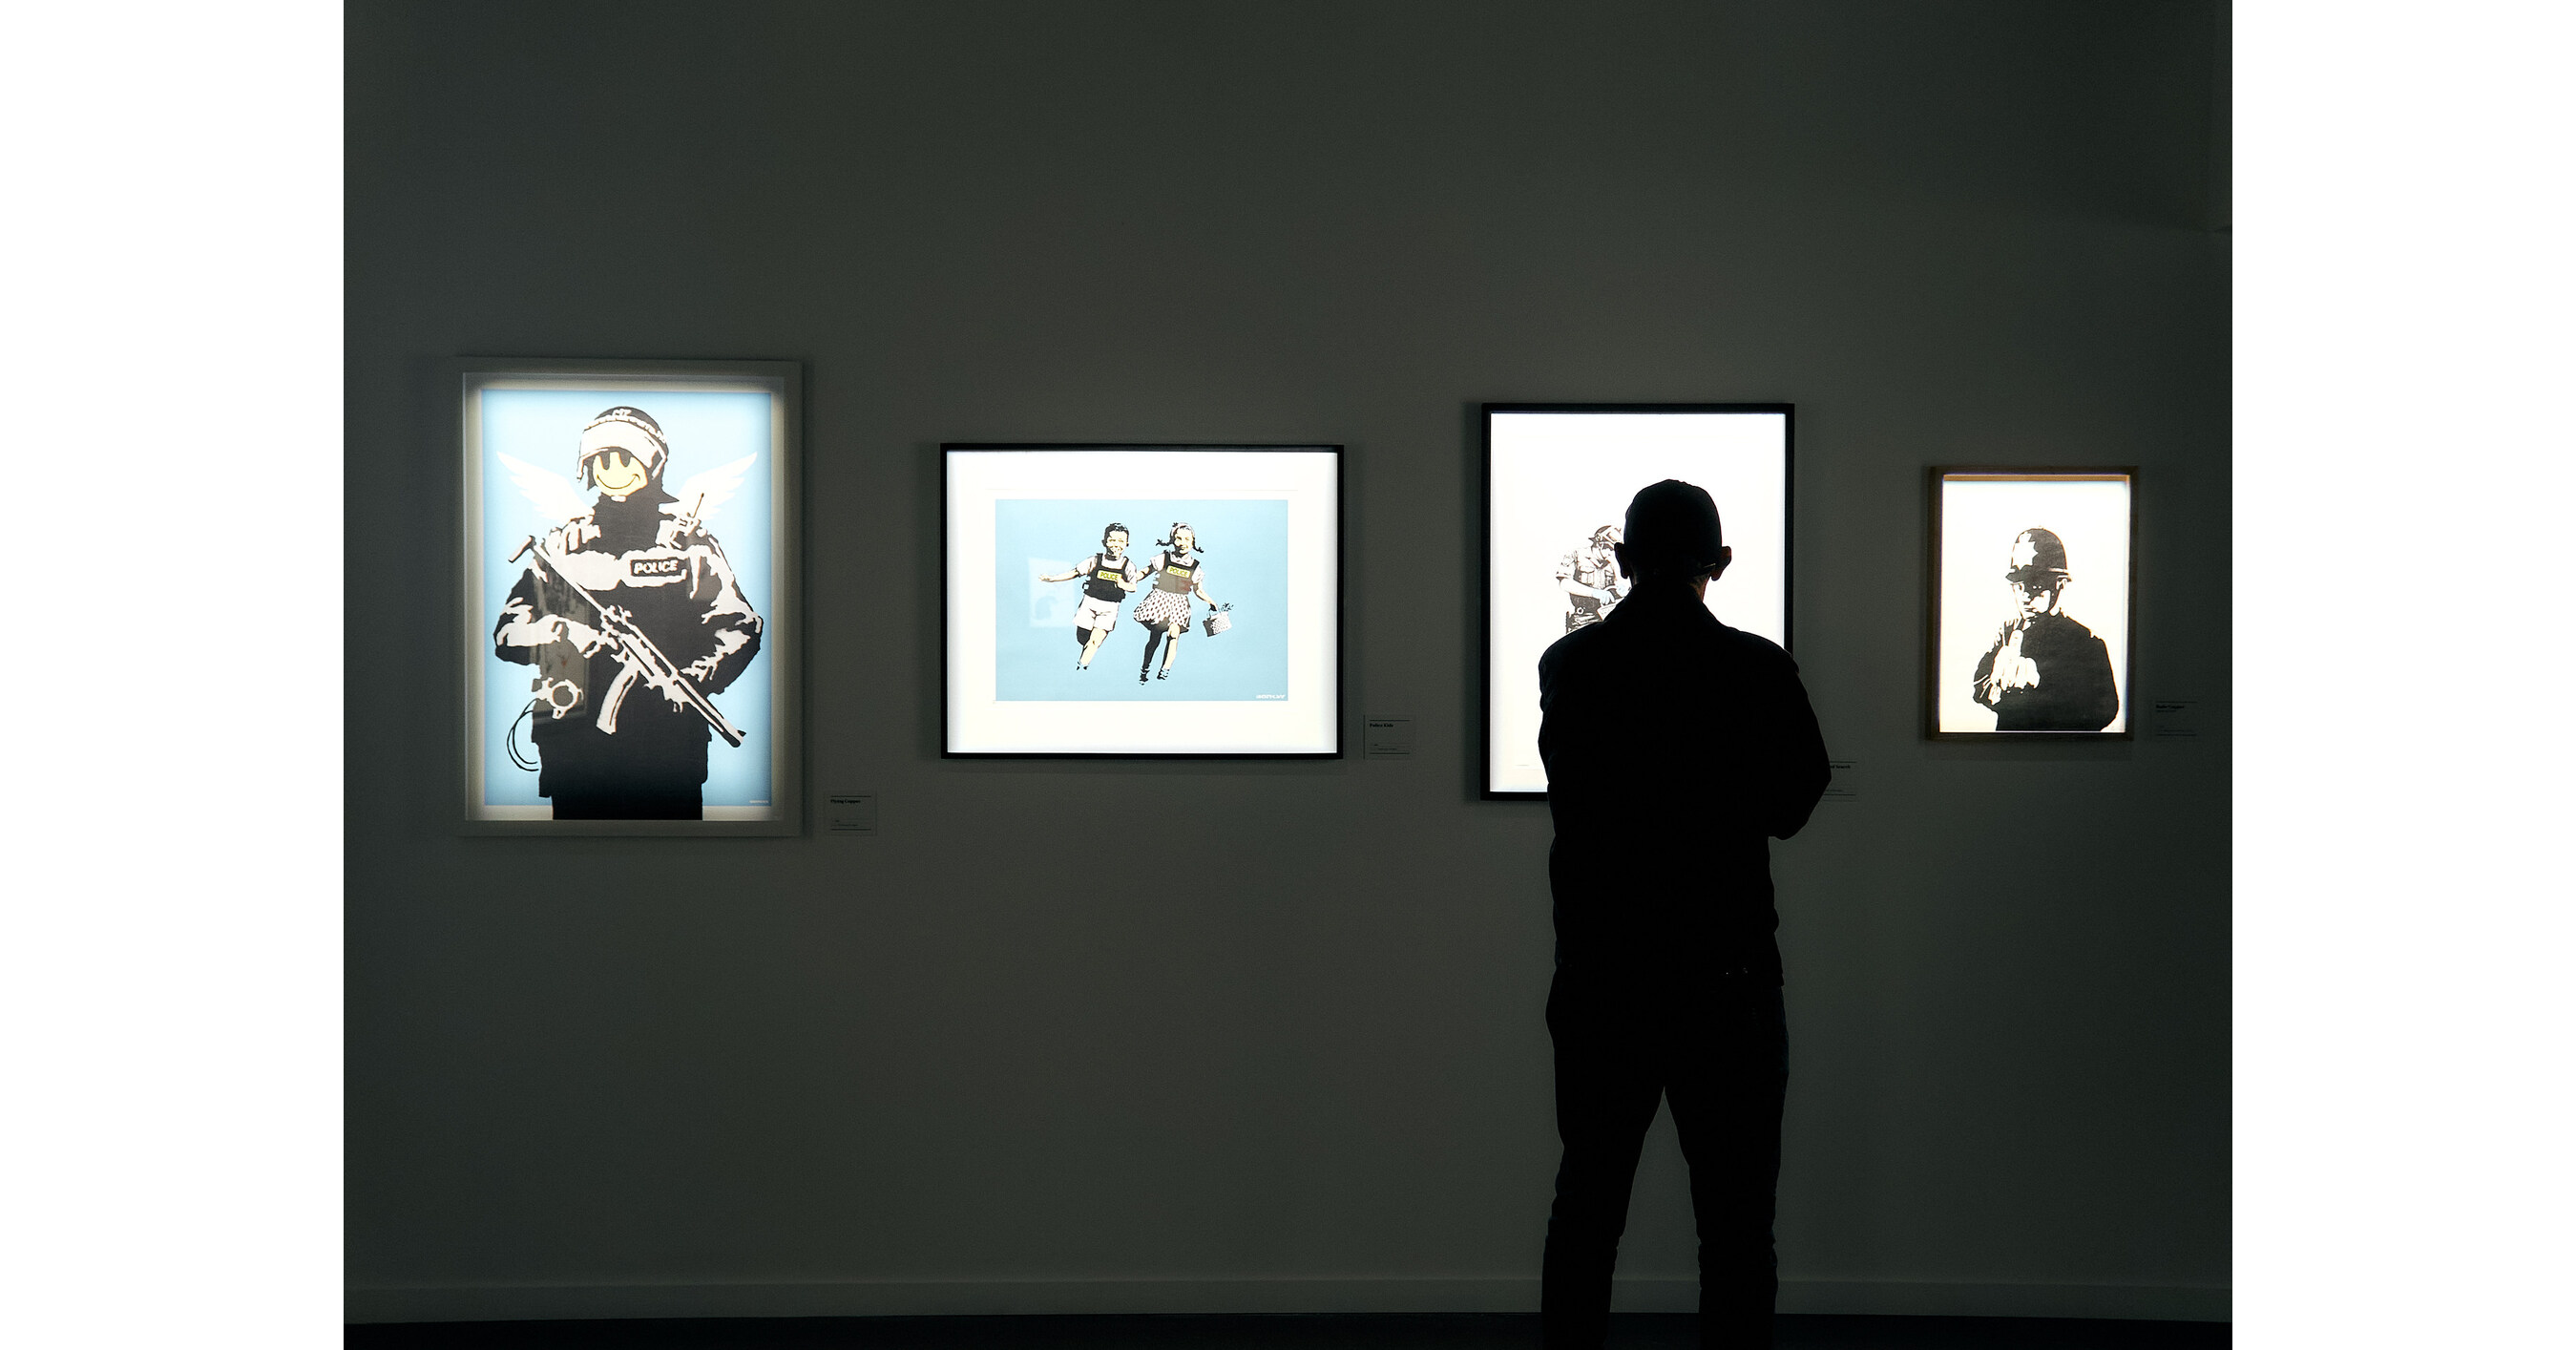 WORLD’S LARGEST COLLECTION OF BANKSY ARTWORKS ON SHOW IN TORONTO FOR LIMITED TIME!